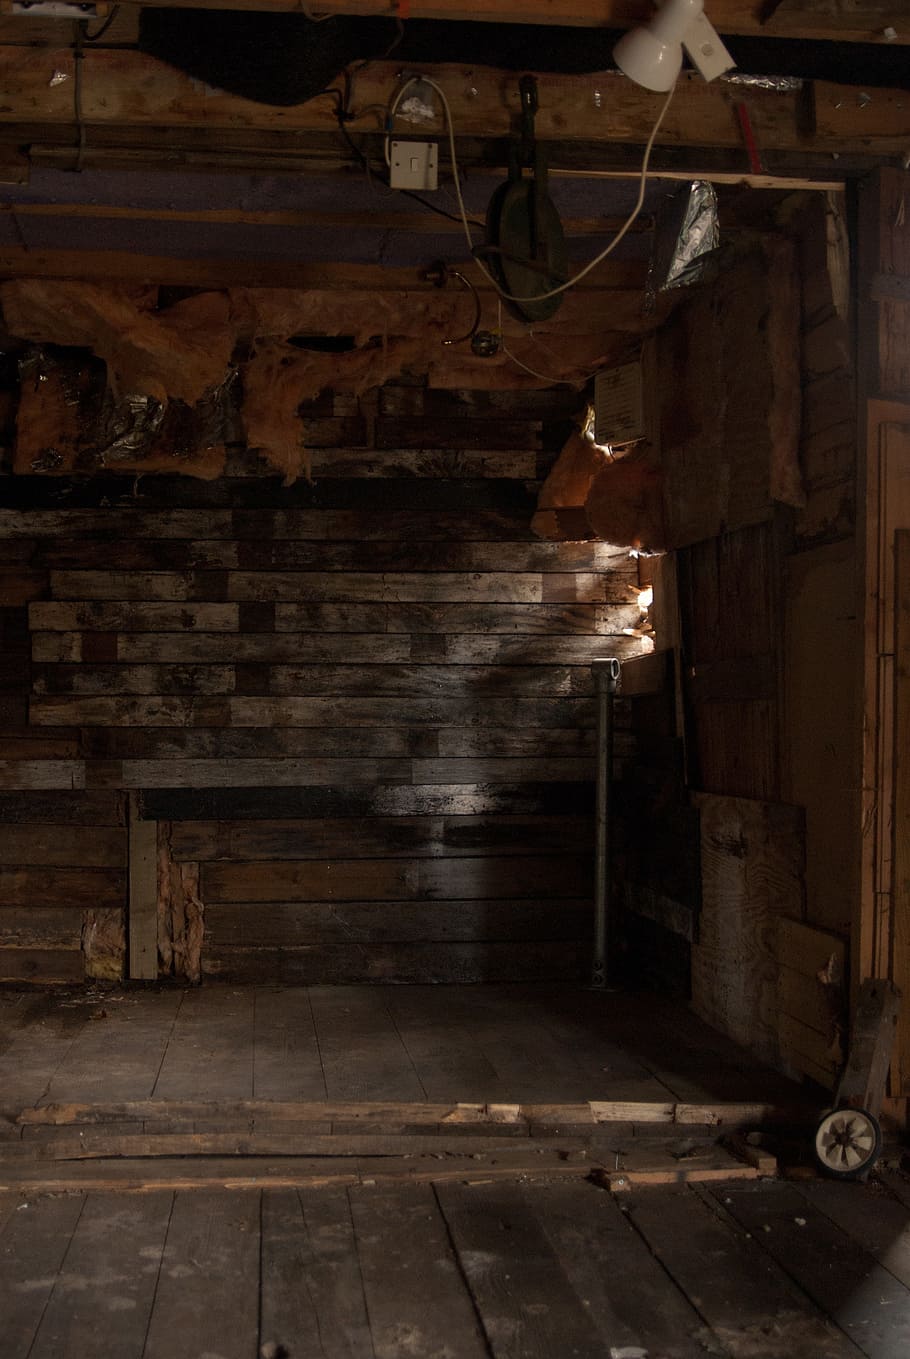 grunge, shed, dark, dirty, textured, weathered, house, vintage, rough, indoors